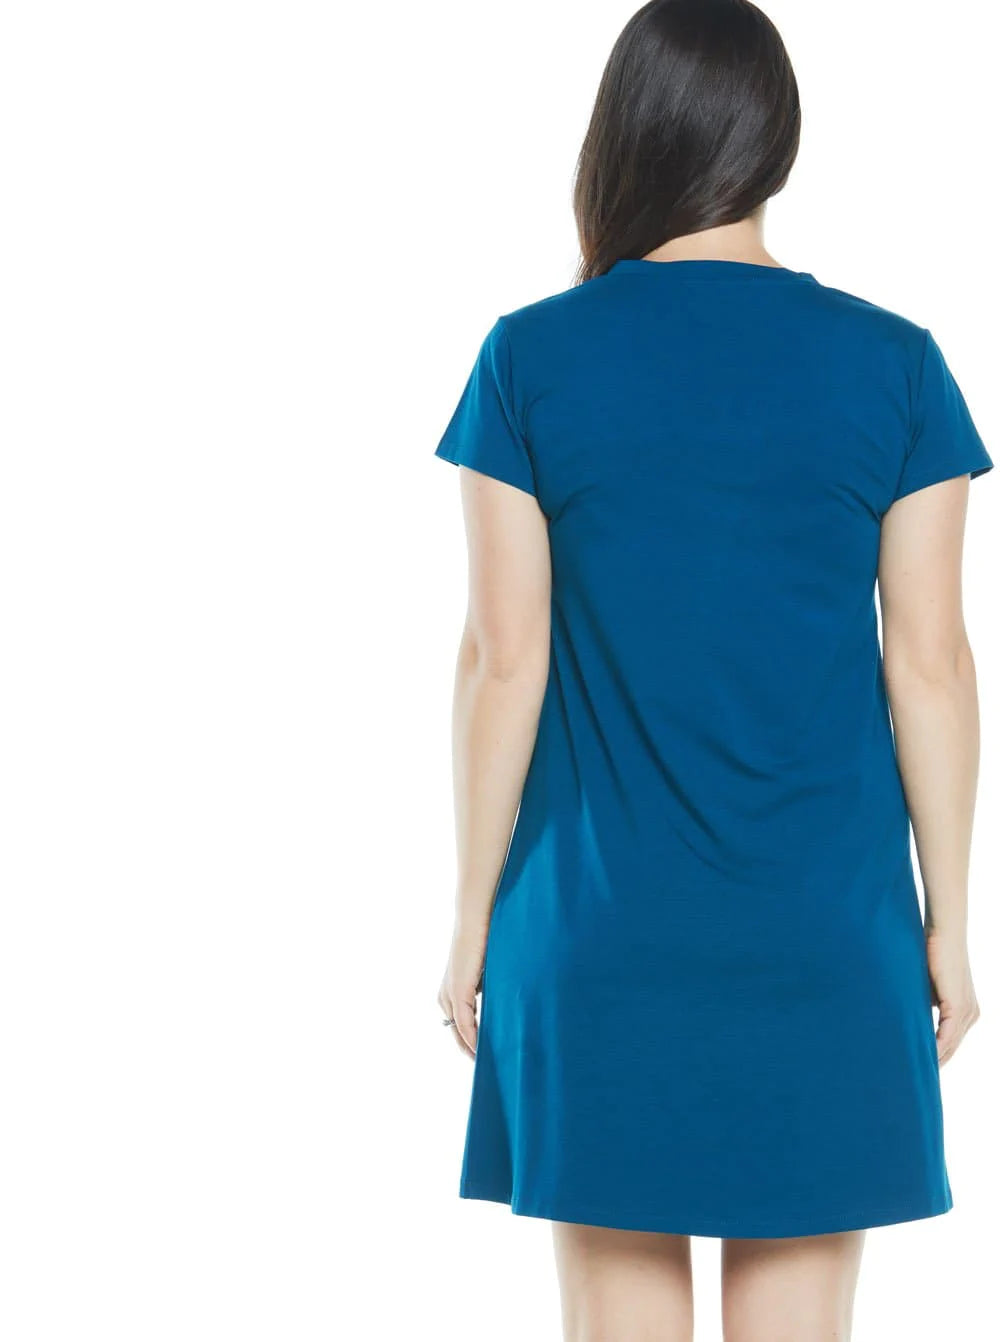 Basic T-Shirt Dress - Teal | Angel | Effortlessly chic, this t-shirt dress features casual feel for versatility and an easy relax fit style.
Fabric: 95% cotton 5% elastane
True to size
Danika wears a 12